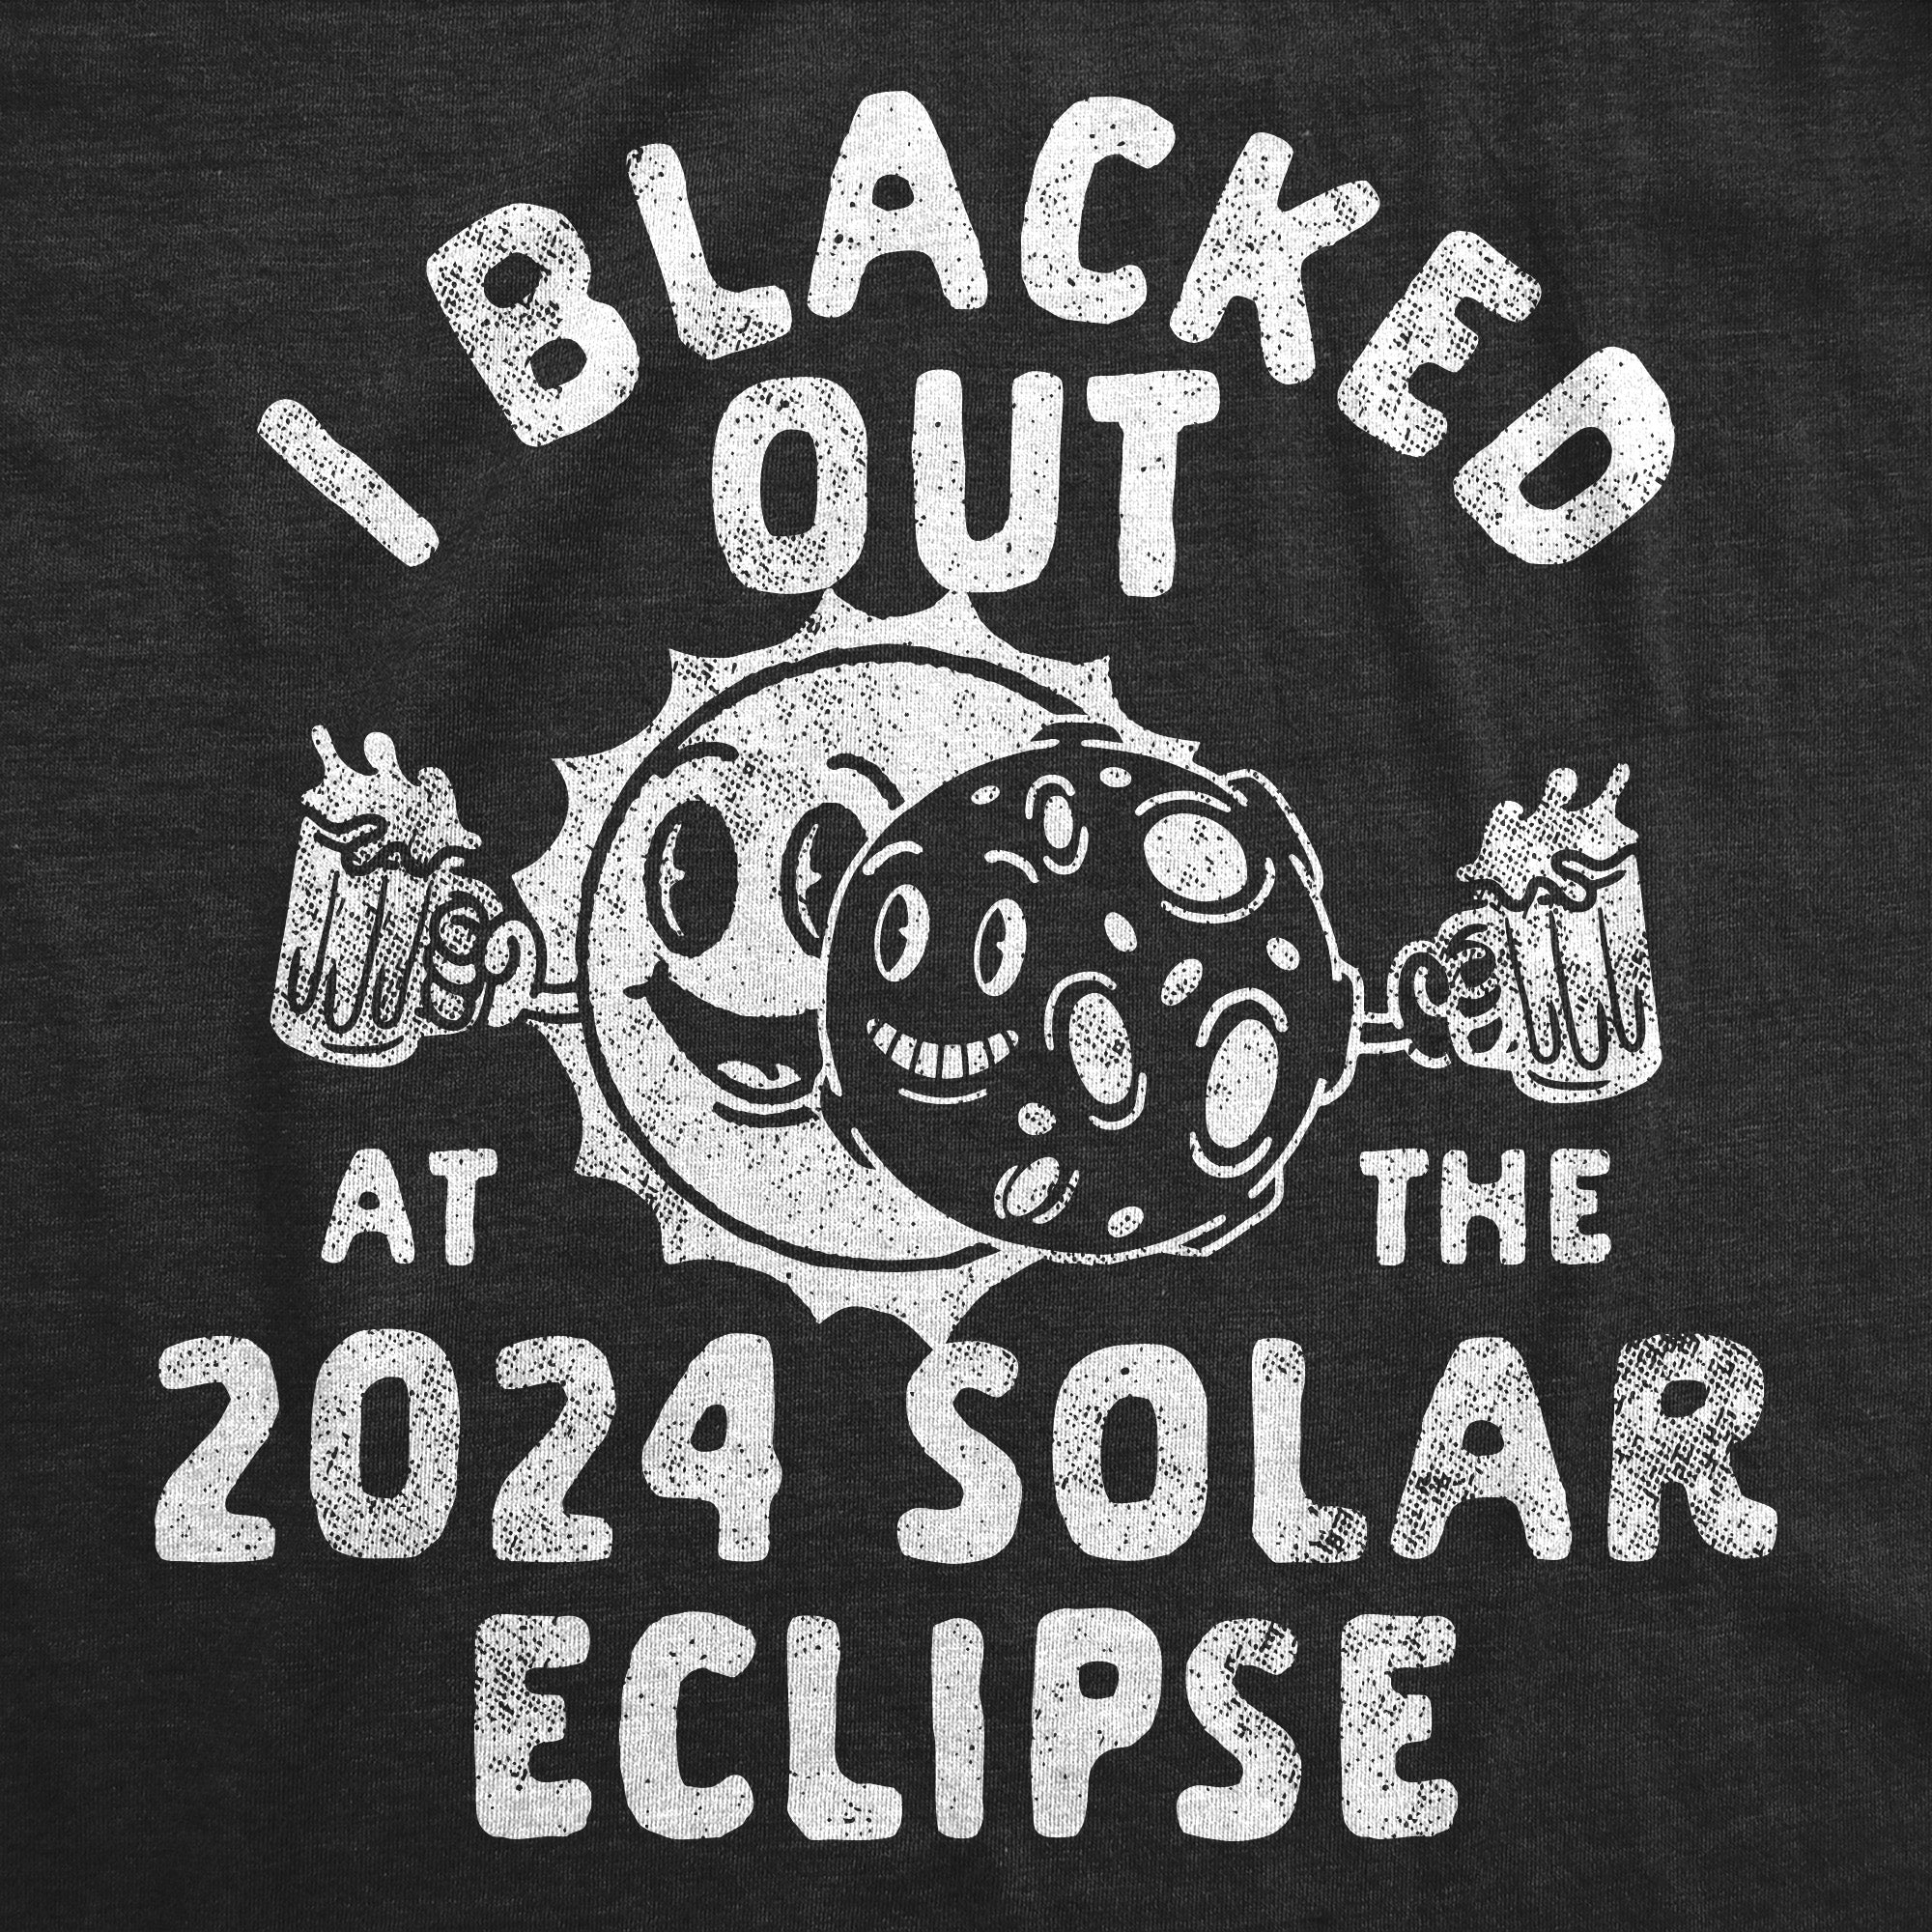 Funny Heather Black - 2024 Solar Eclipse I Blacked Out At The 2024 Solar Eclipse Womens T Shirt Nerdy Drinking sarcastic Tee